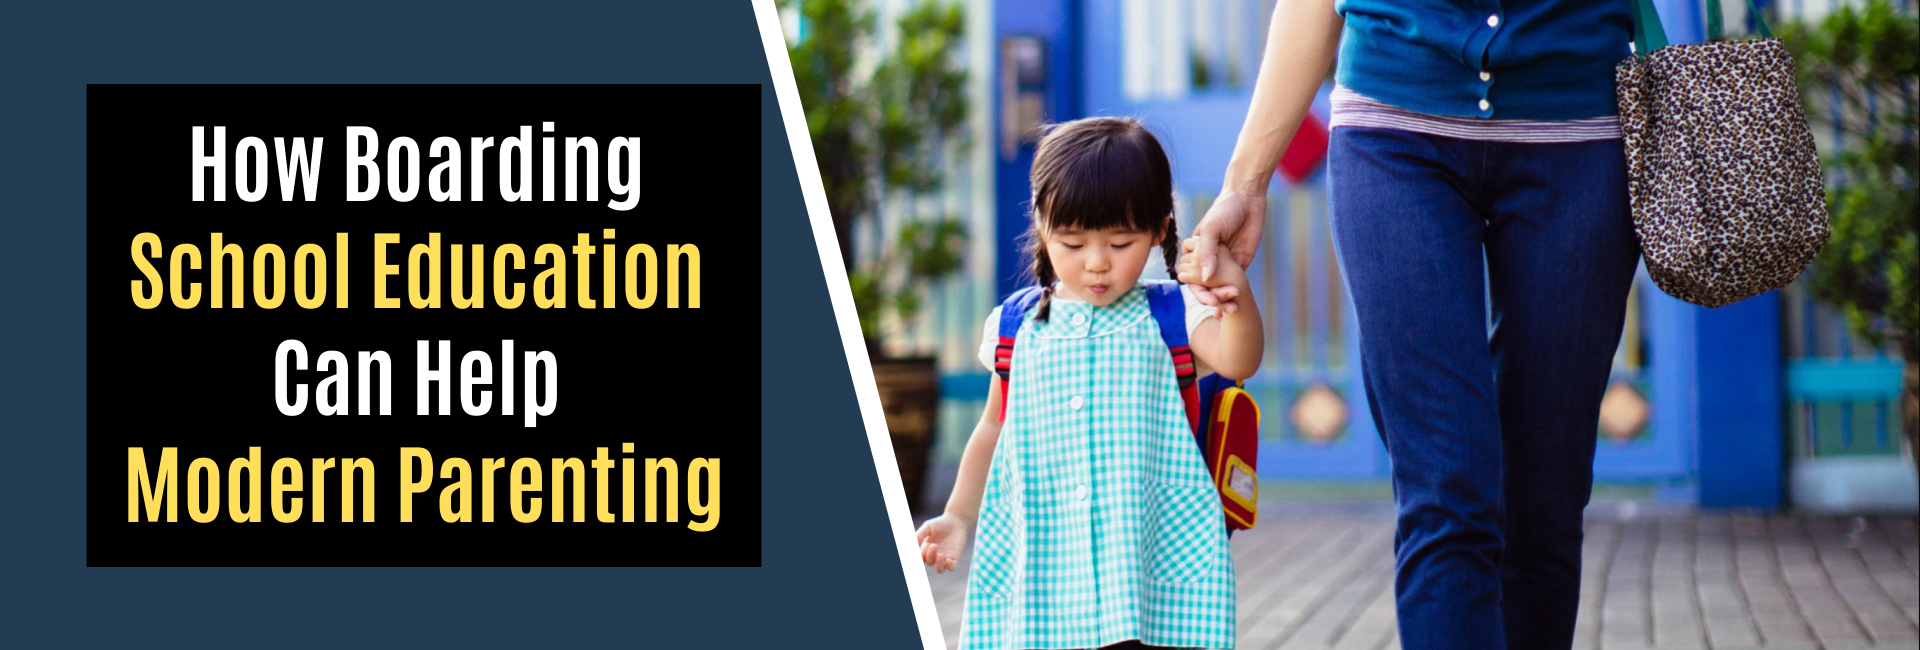 How Boarding school education can help modern parenting-Featured Image